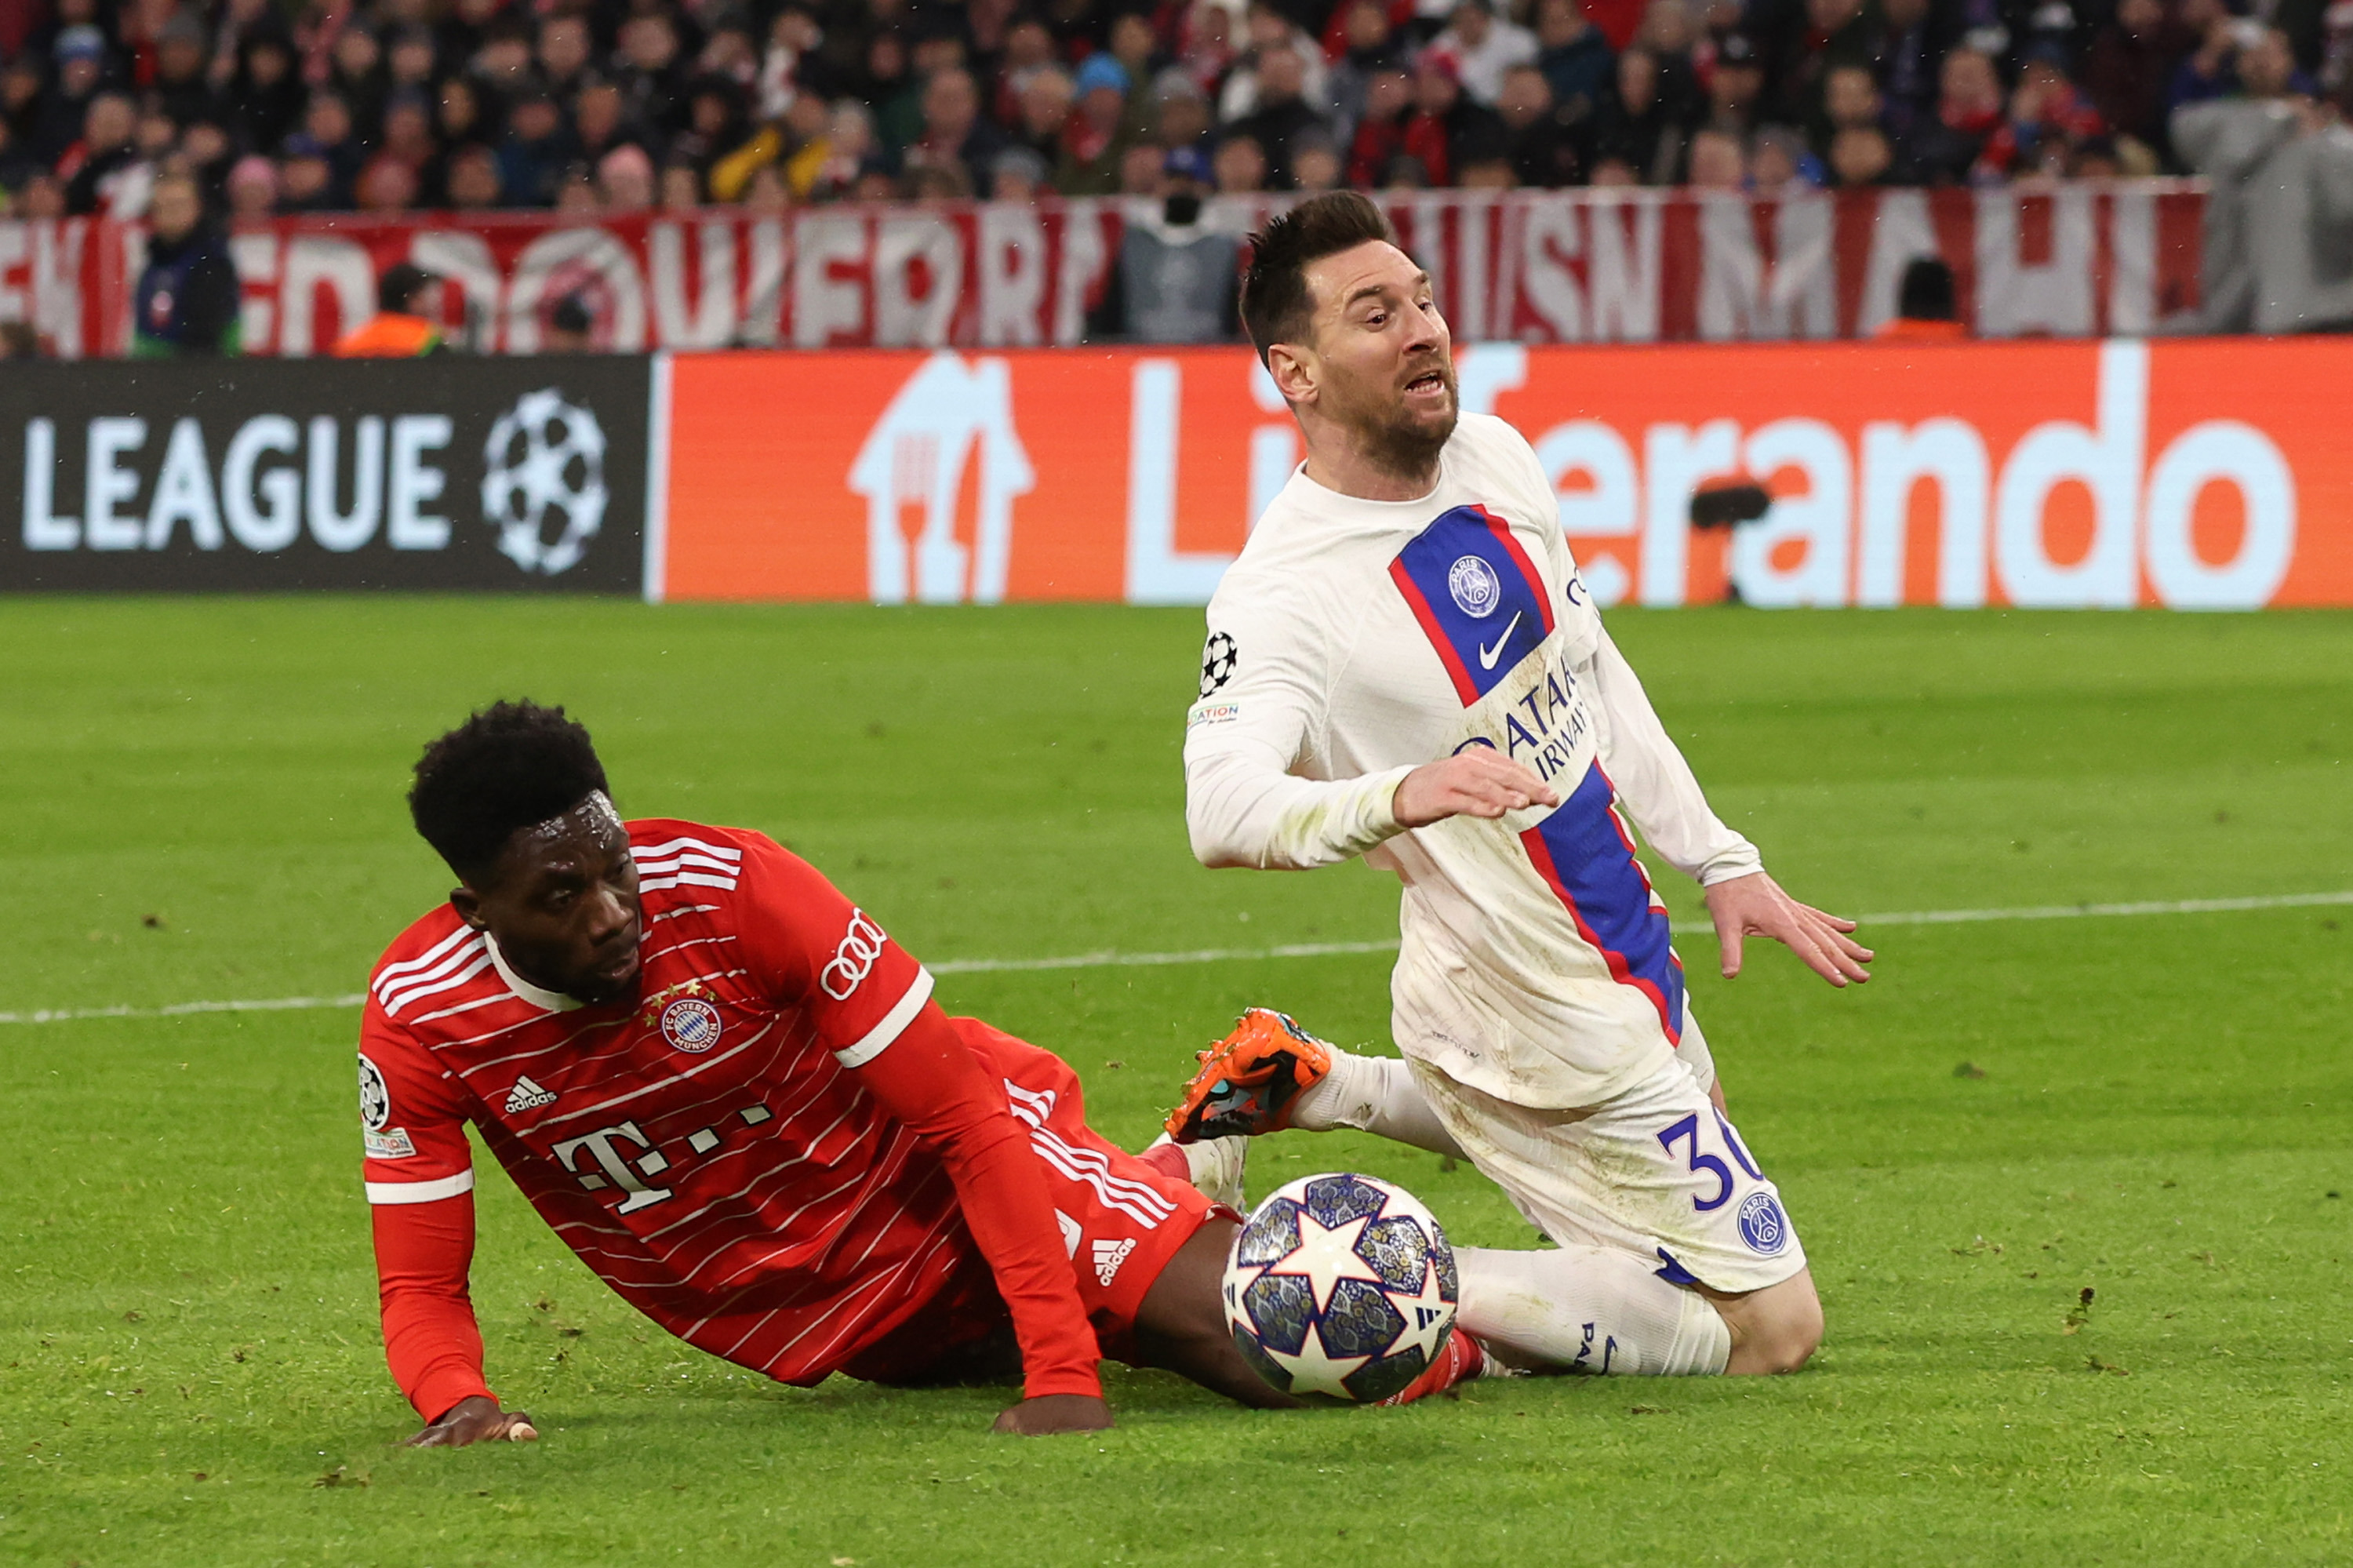 Lionel Messi of Paris Saint-Germain is tackled by Alphonso Davies of Bayern Munich.